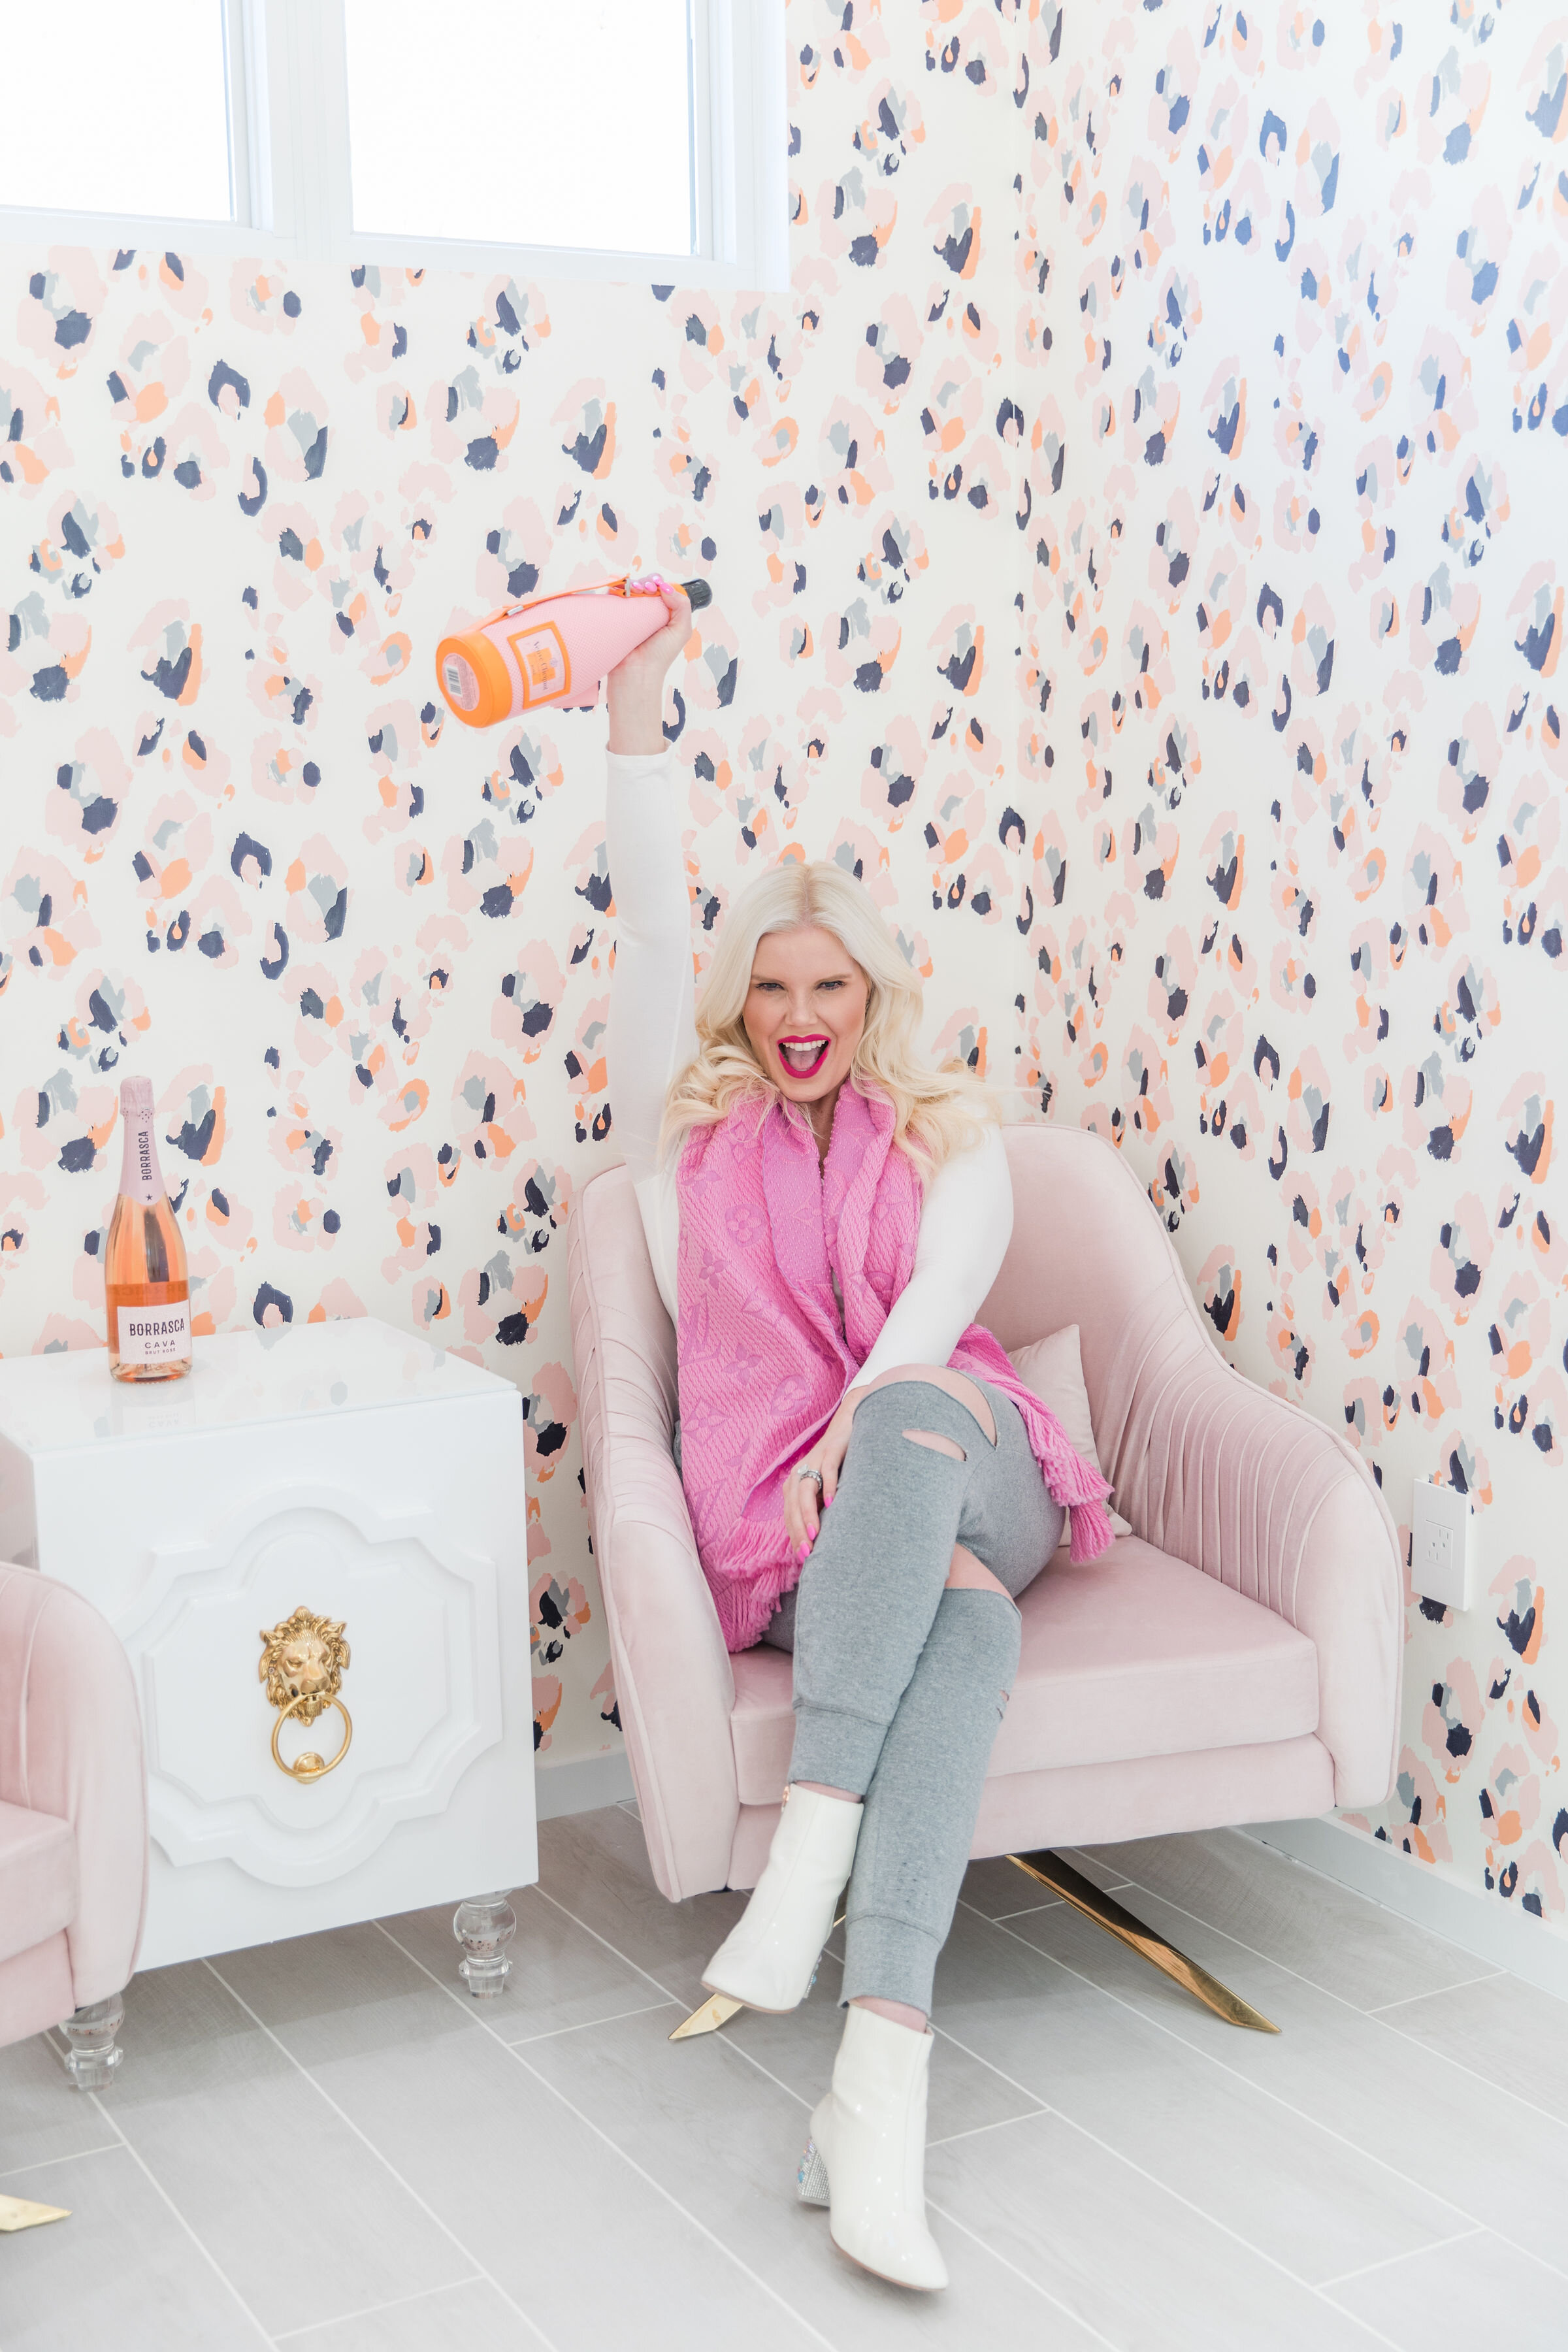 The-Caroline-Doll-Champagne-Is-Always-The-Answer-Lifestyle-Influencer-National-Beverage-Day-Champagne-Life-Veuve-Clicquot-Glass-Of-Sparkling-Bubbly-Sweet-3.jpg